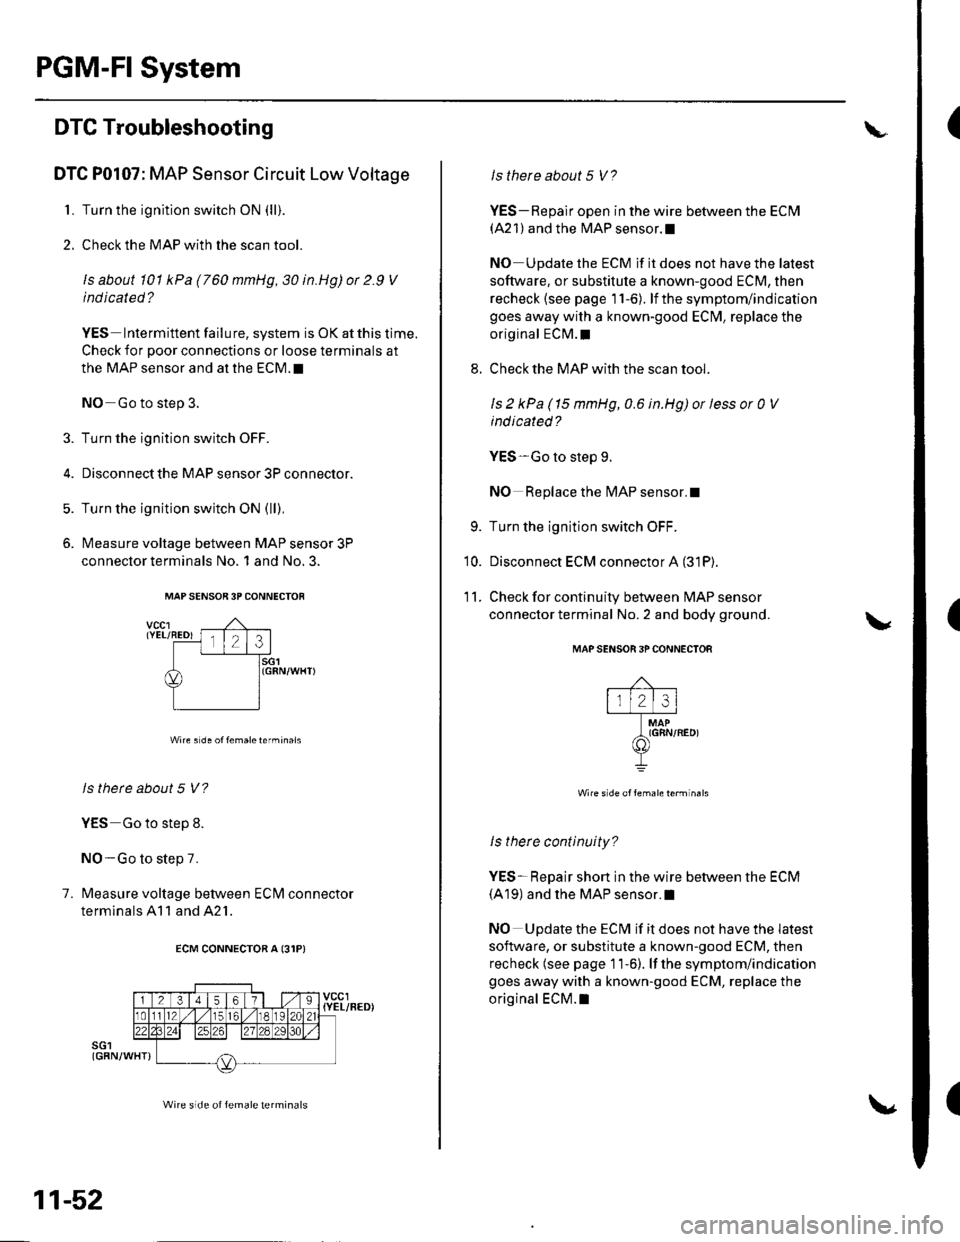 HONDA CIVIC 2002 7.G Workshop Manual PGM-FI System
(
(
(
DTC Troubleshooting
DTC P0107: MAP Sensor Circuit Low Voltage
1. Turn the ignition switch ON (lli.
2. Check the MAP with the scan tool.
ls about 101 kPa (760 mmHg,30 in.Hg)or 2.9 V